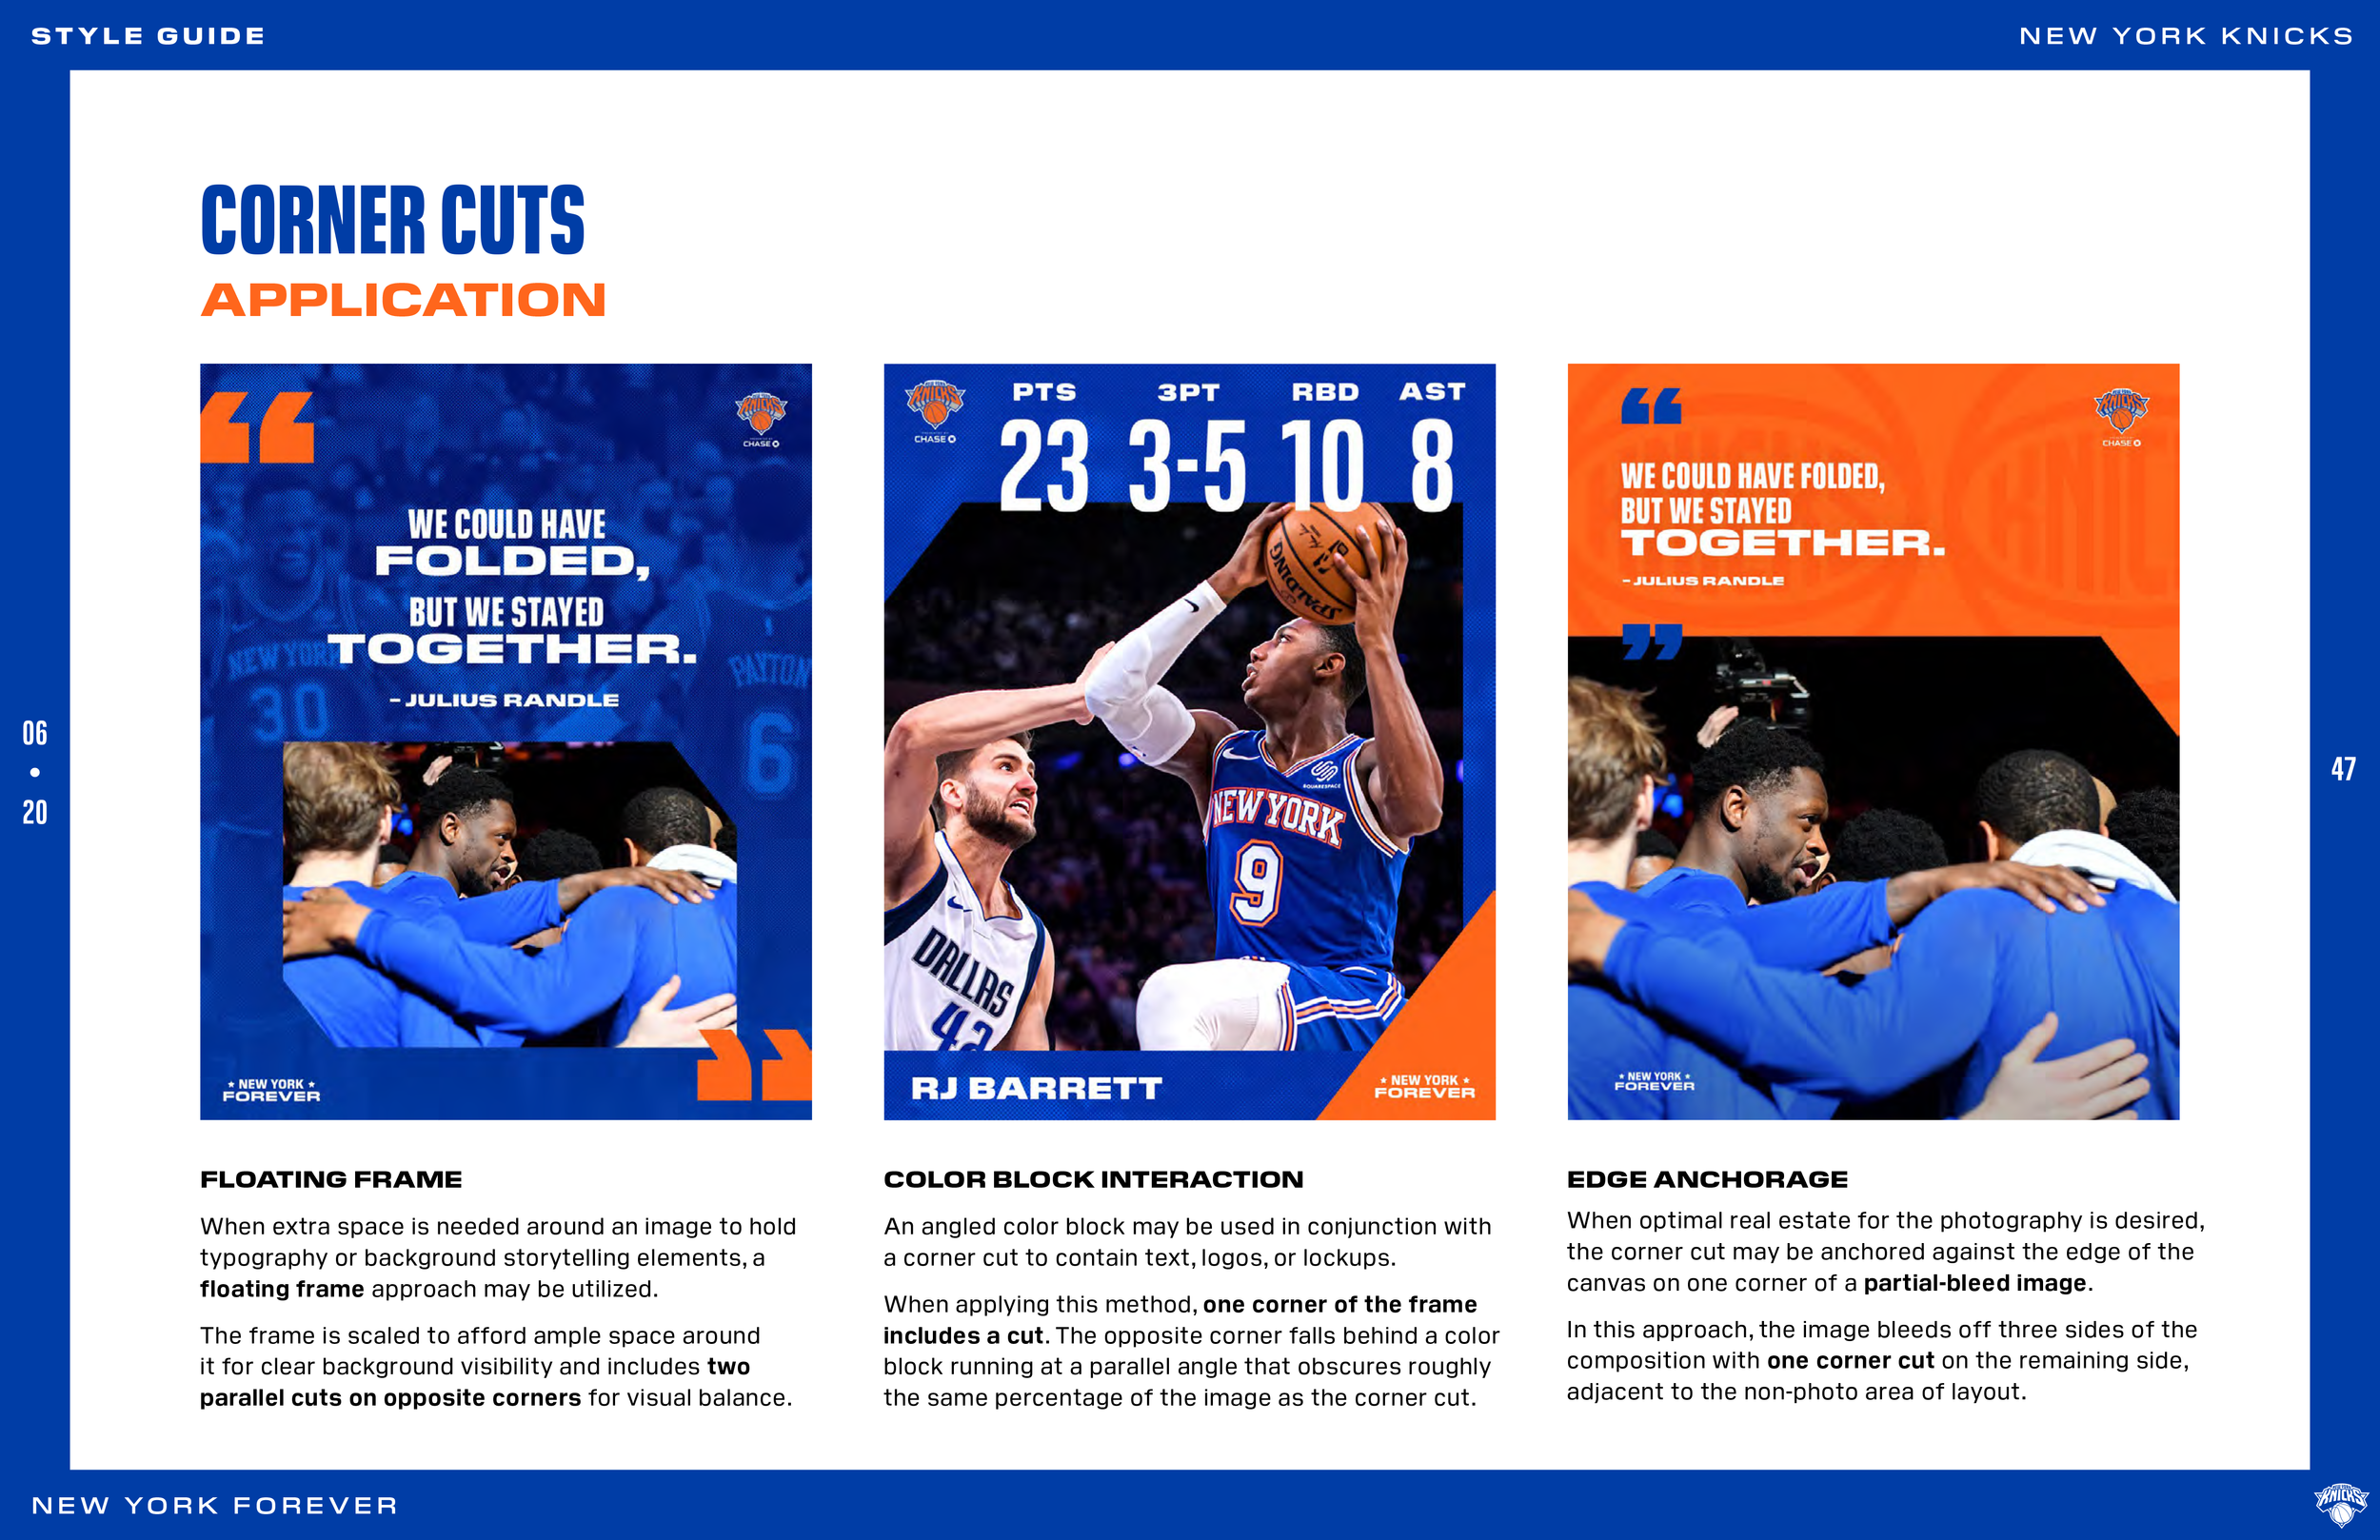 Pages from KNICKS_StyleGuide_062420 47.png